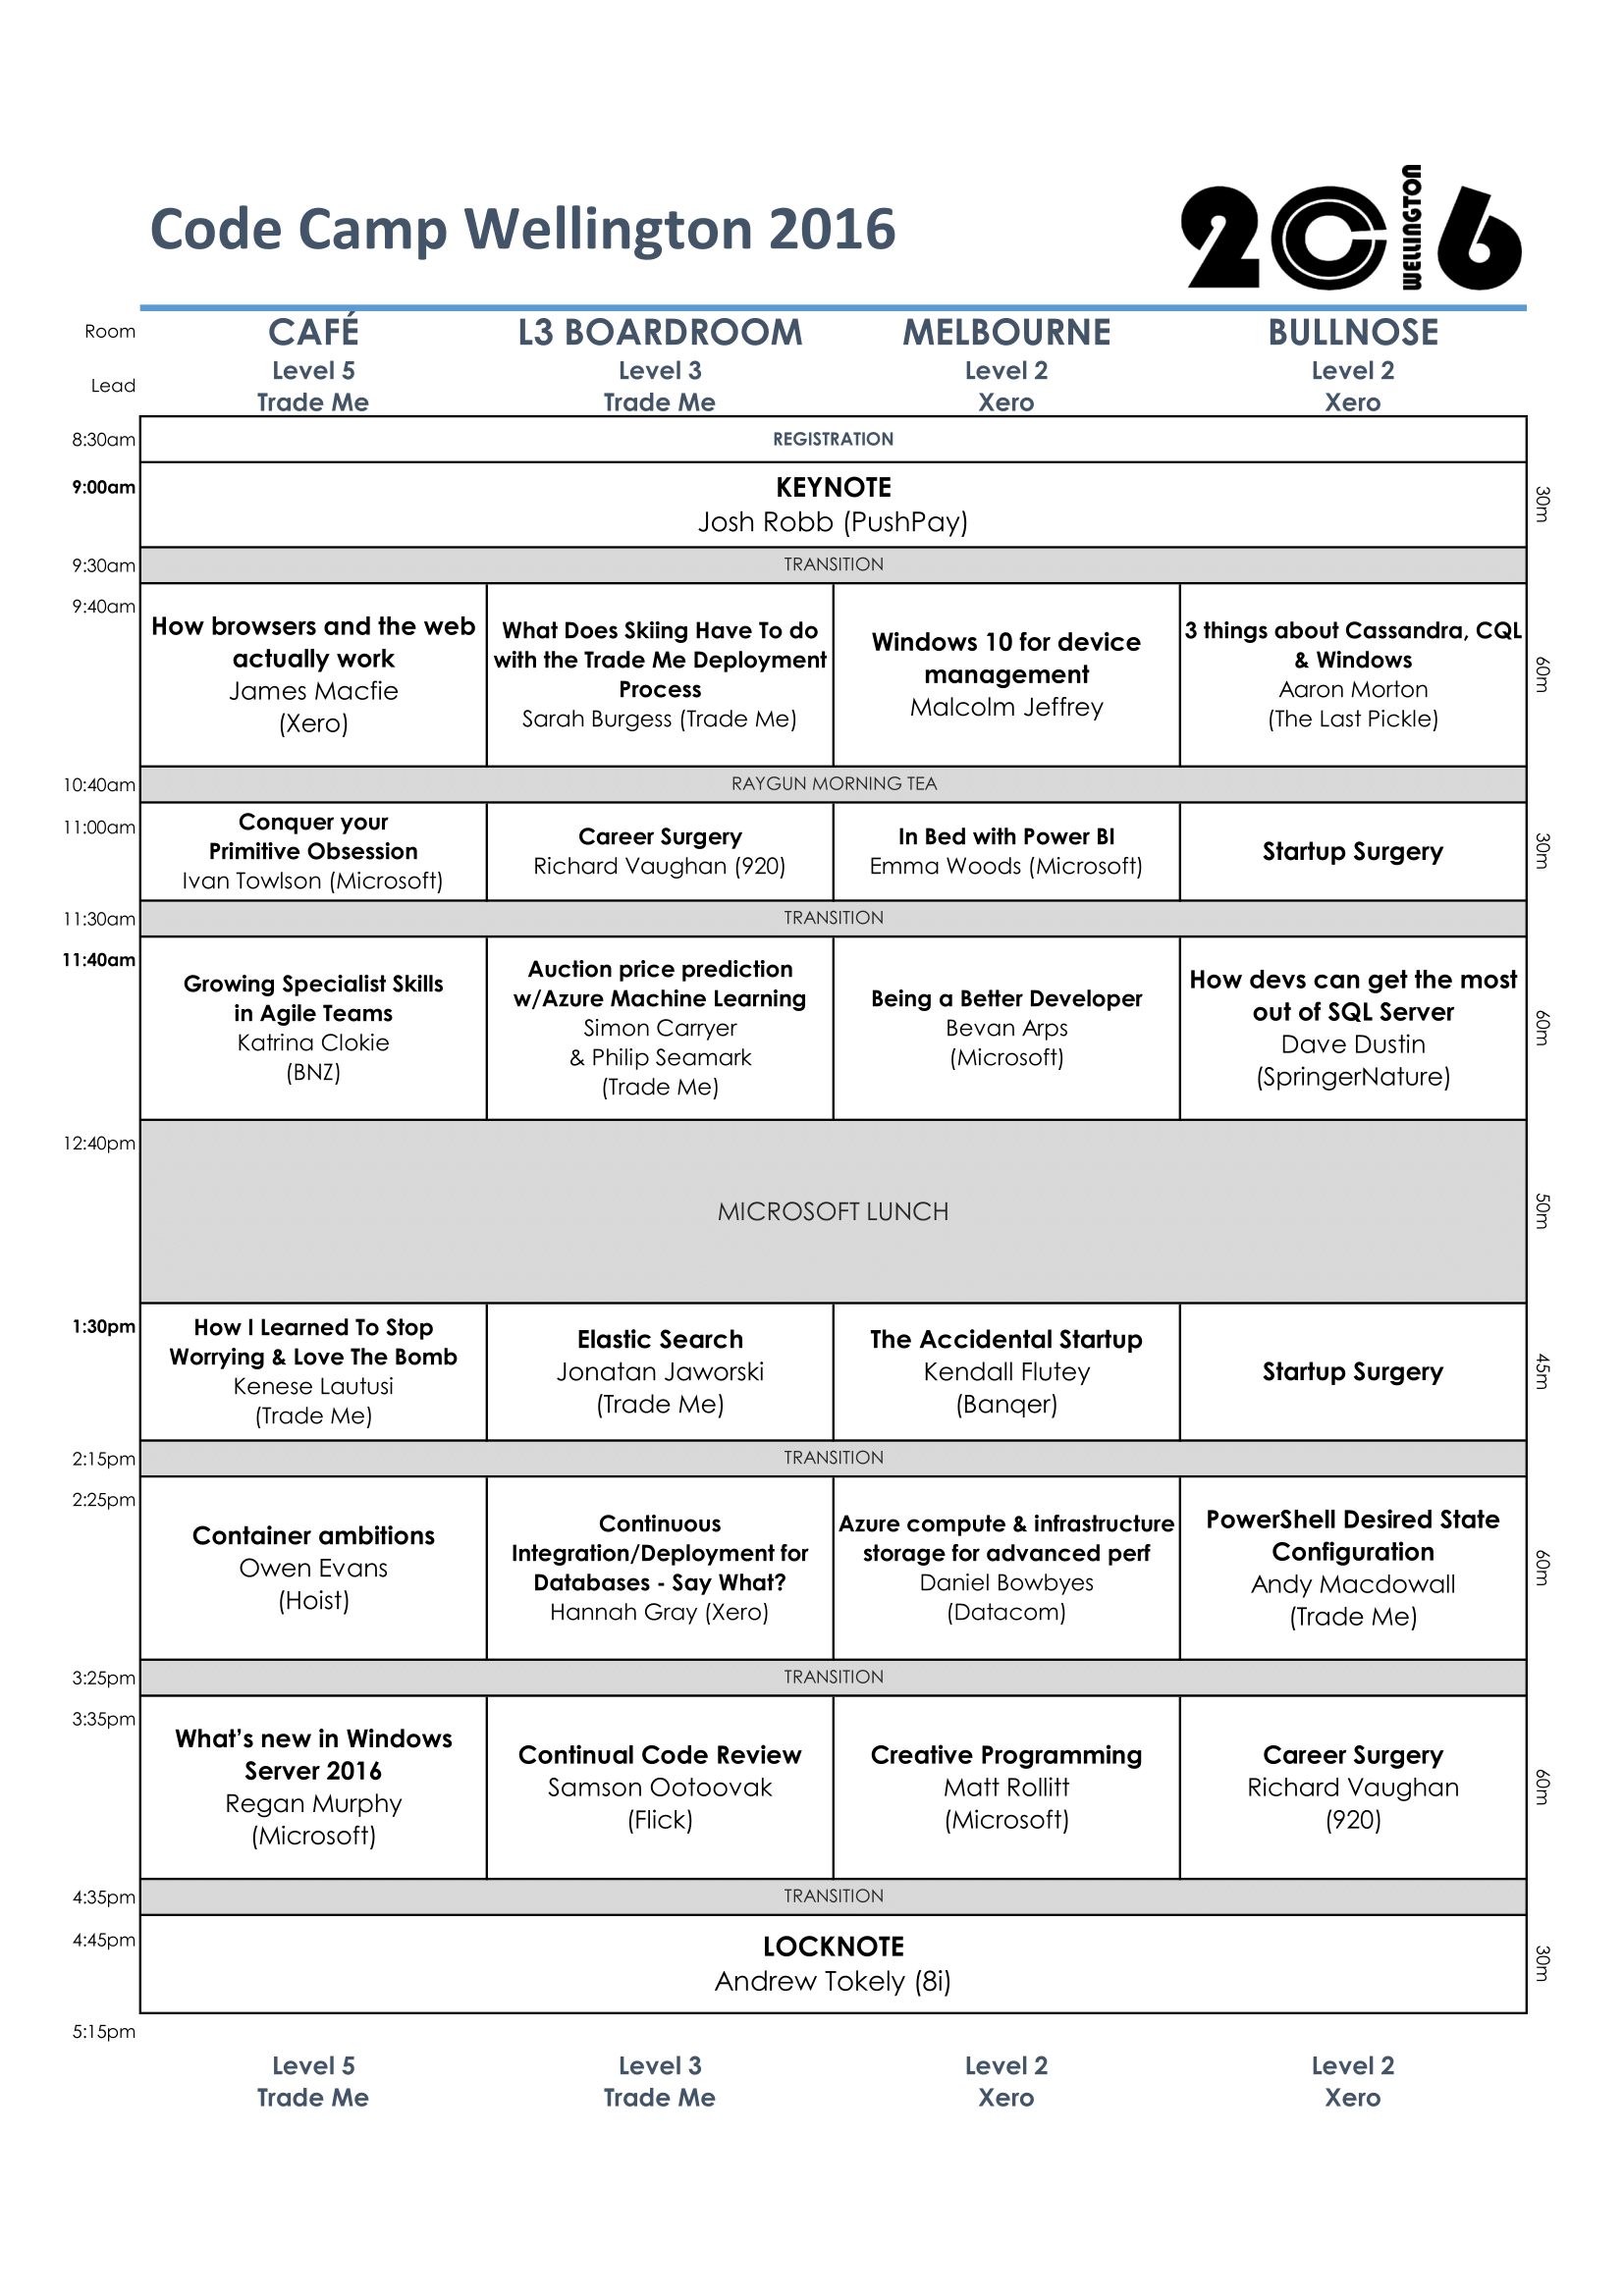 Schedule from CCW2016